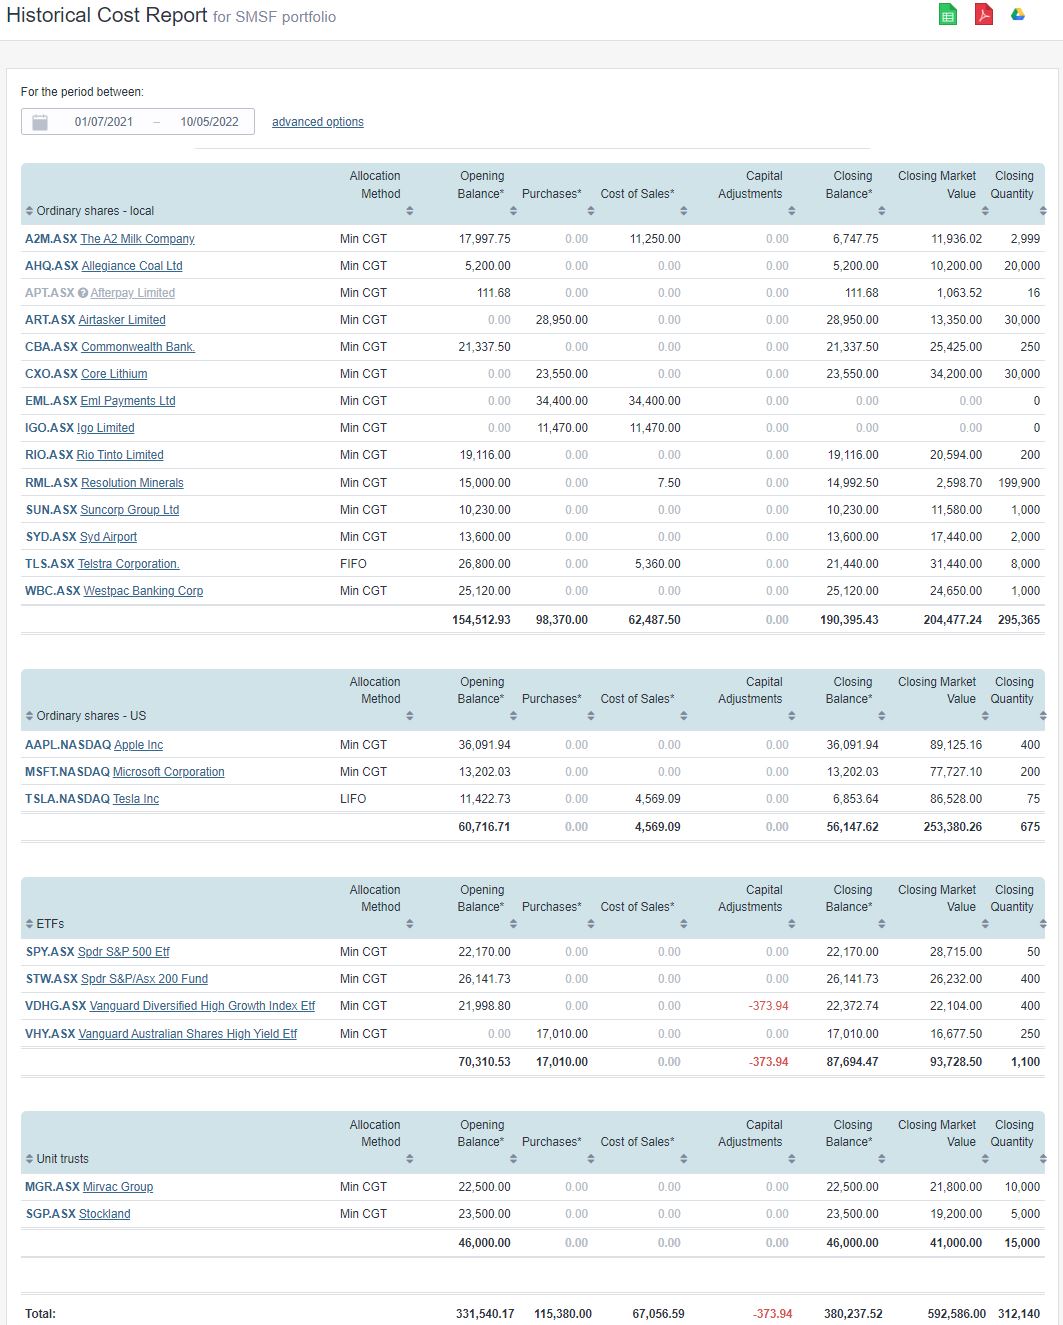 Historical Cost Report SMSF